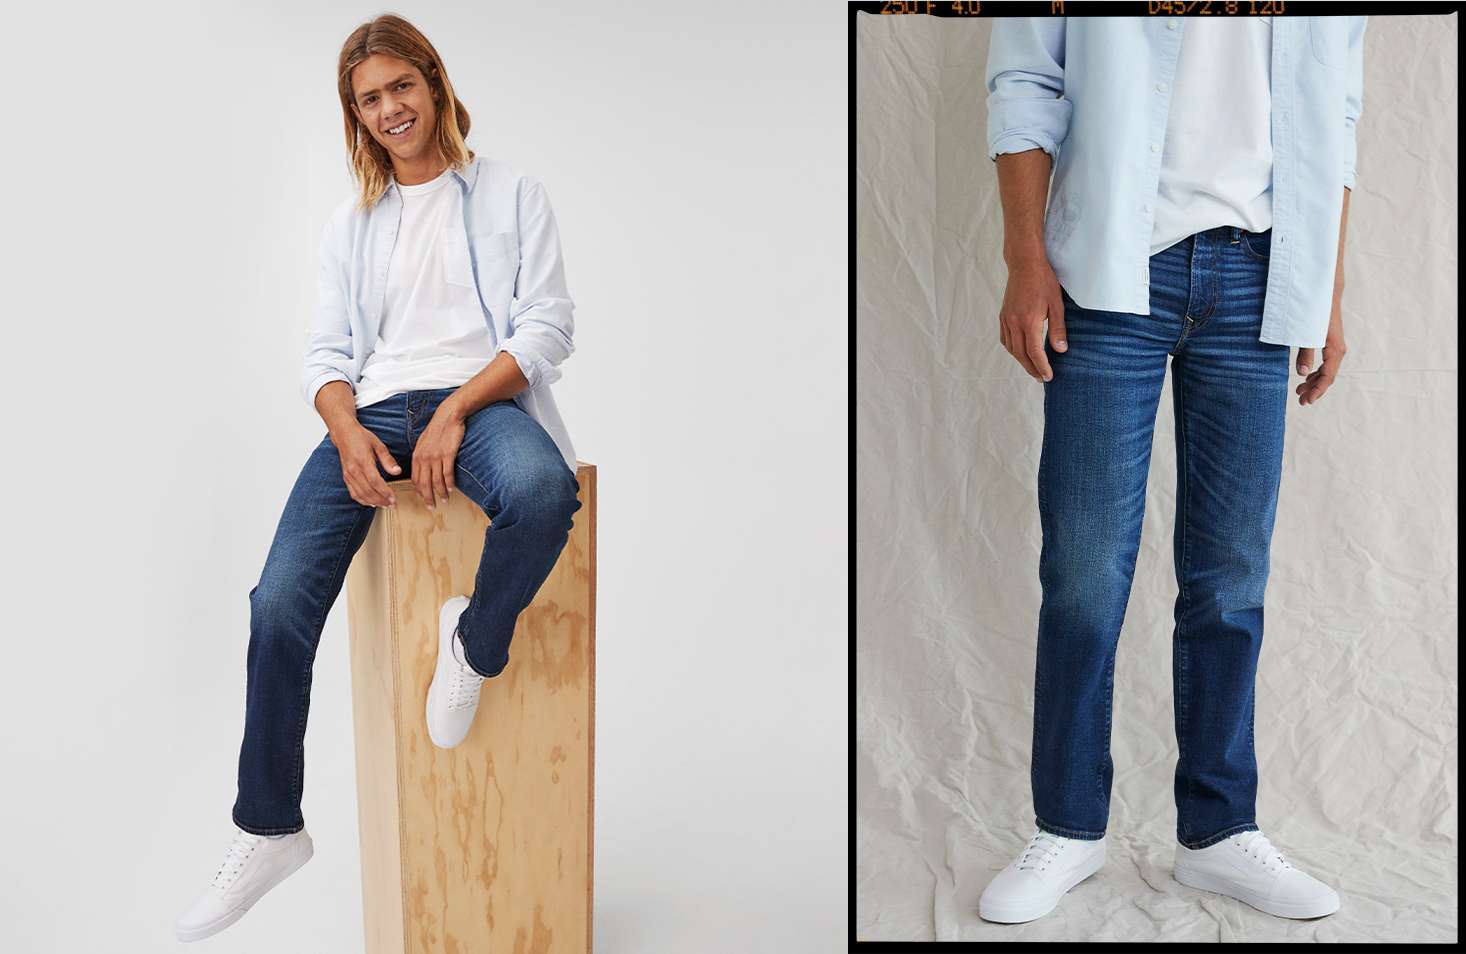 https://s7d2.scene7.com/is/image/aeo/20230216-jeans-m-inpage-tier1-straight-lg?defaultImage=20230216-jeans-m-inpage-tier1-straight-lg&scl=1&qlt=60&fmt=jpeg